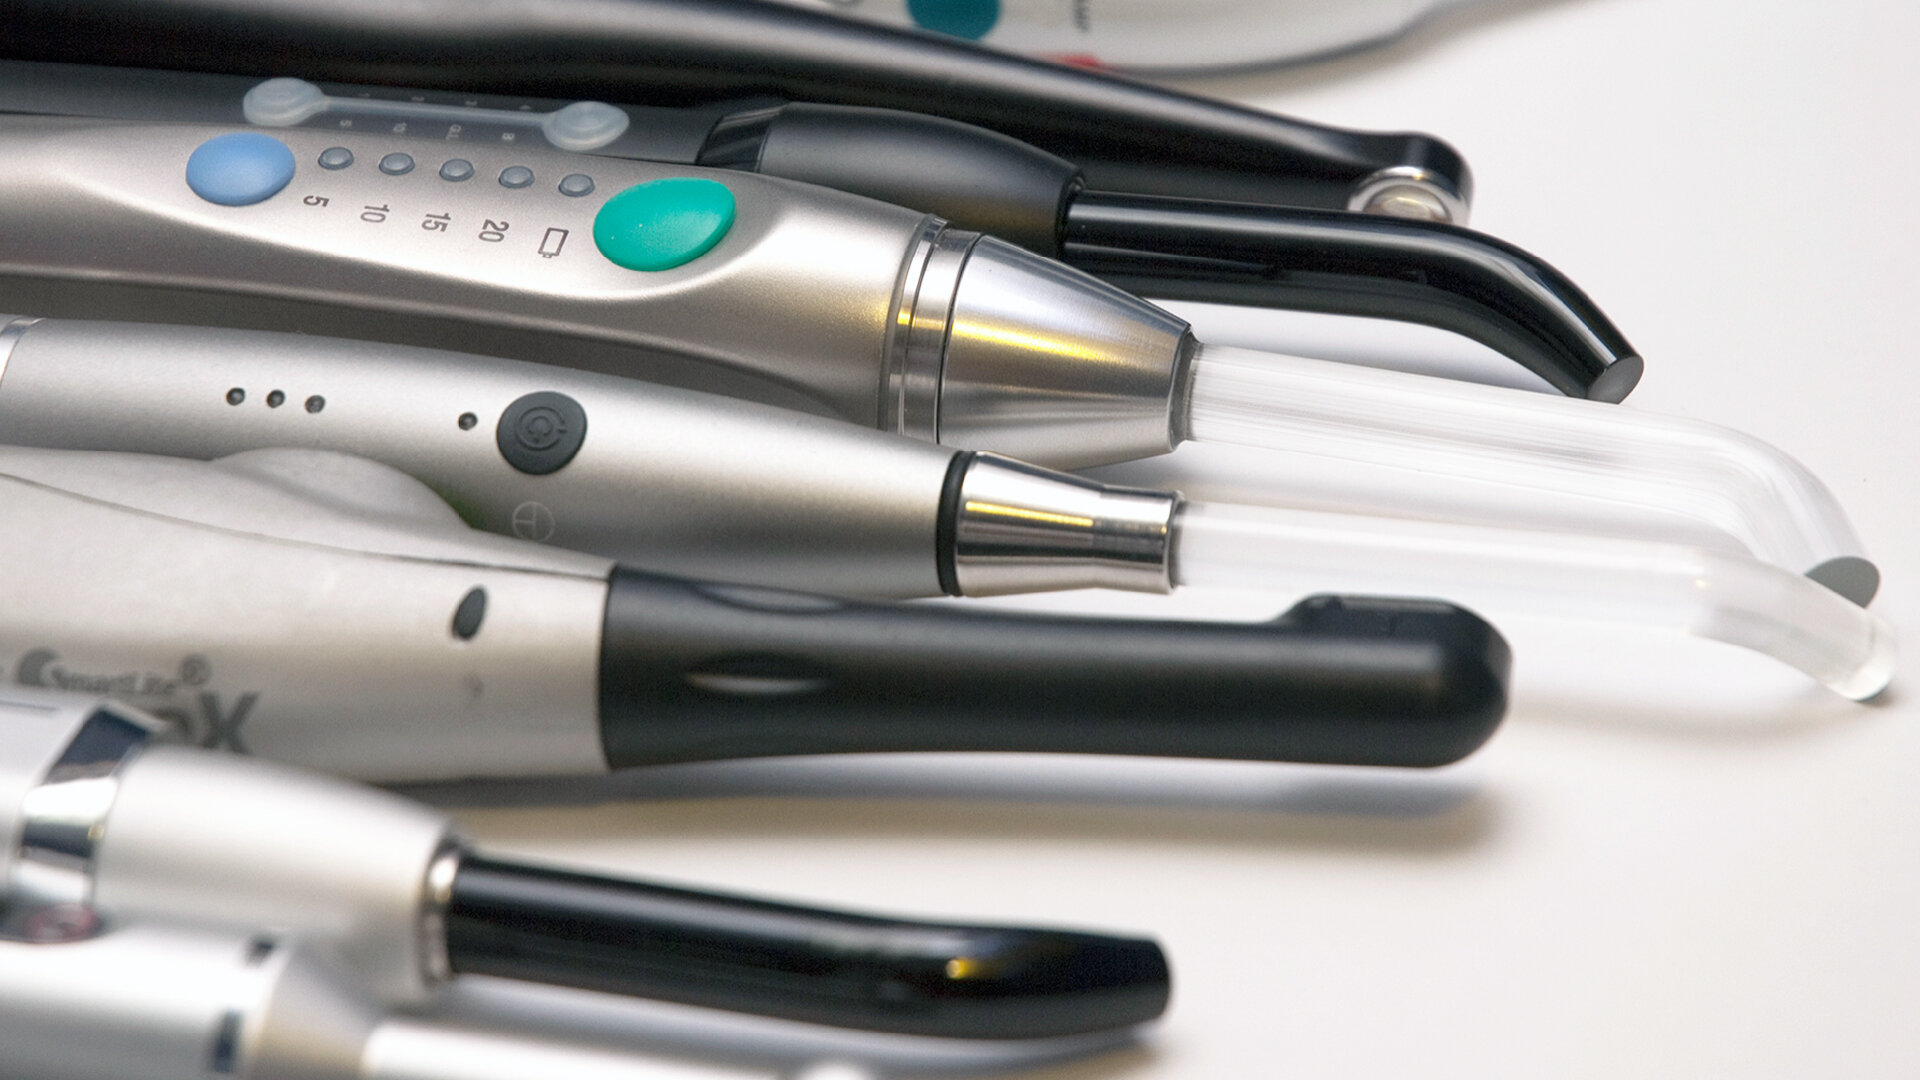 3 Things to Look for When Buying a New Curing Light